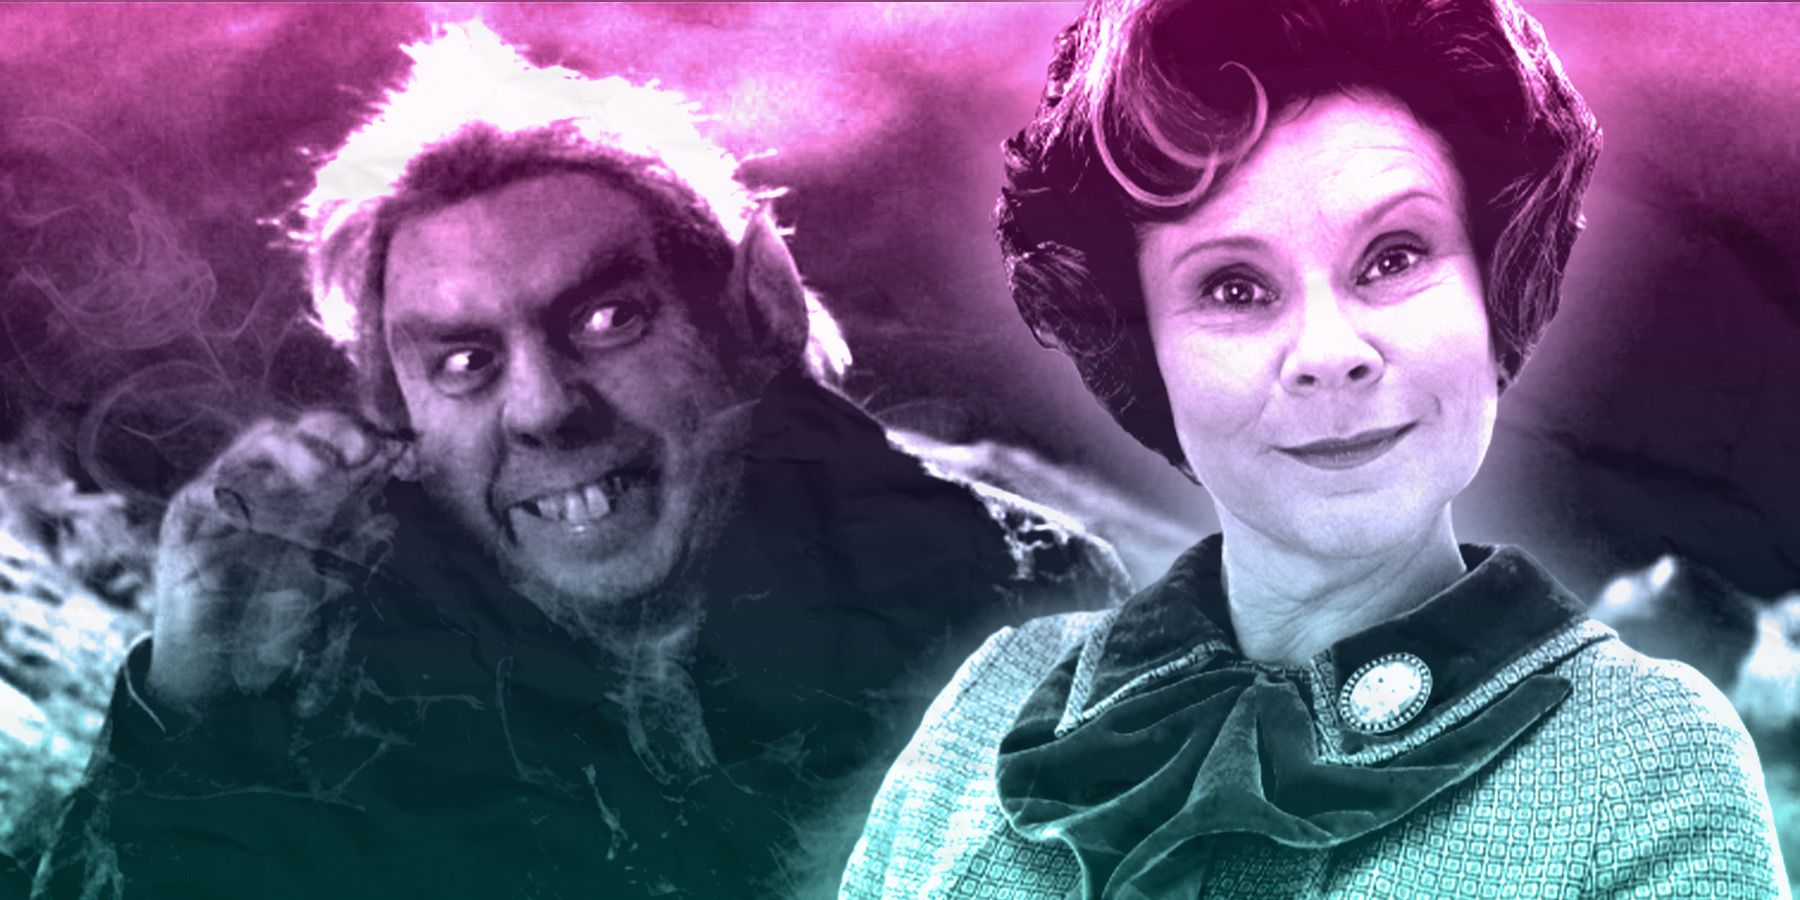 An image of Peter Pettigrew and Dolores Umbridge from Harry Potter